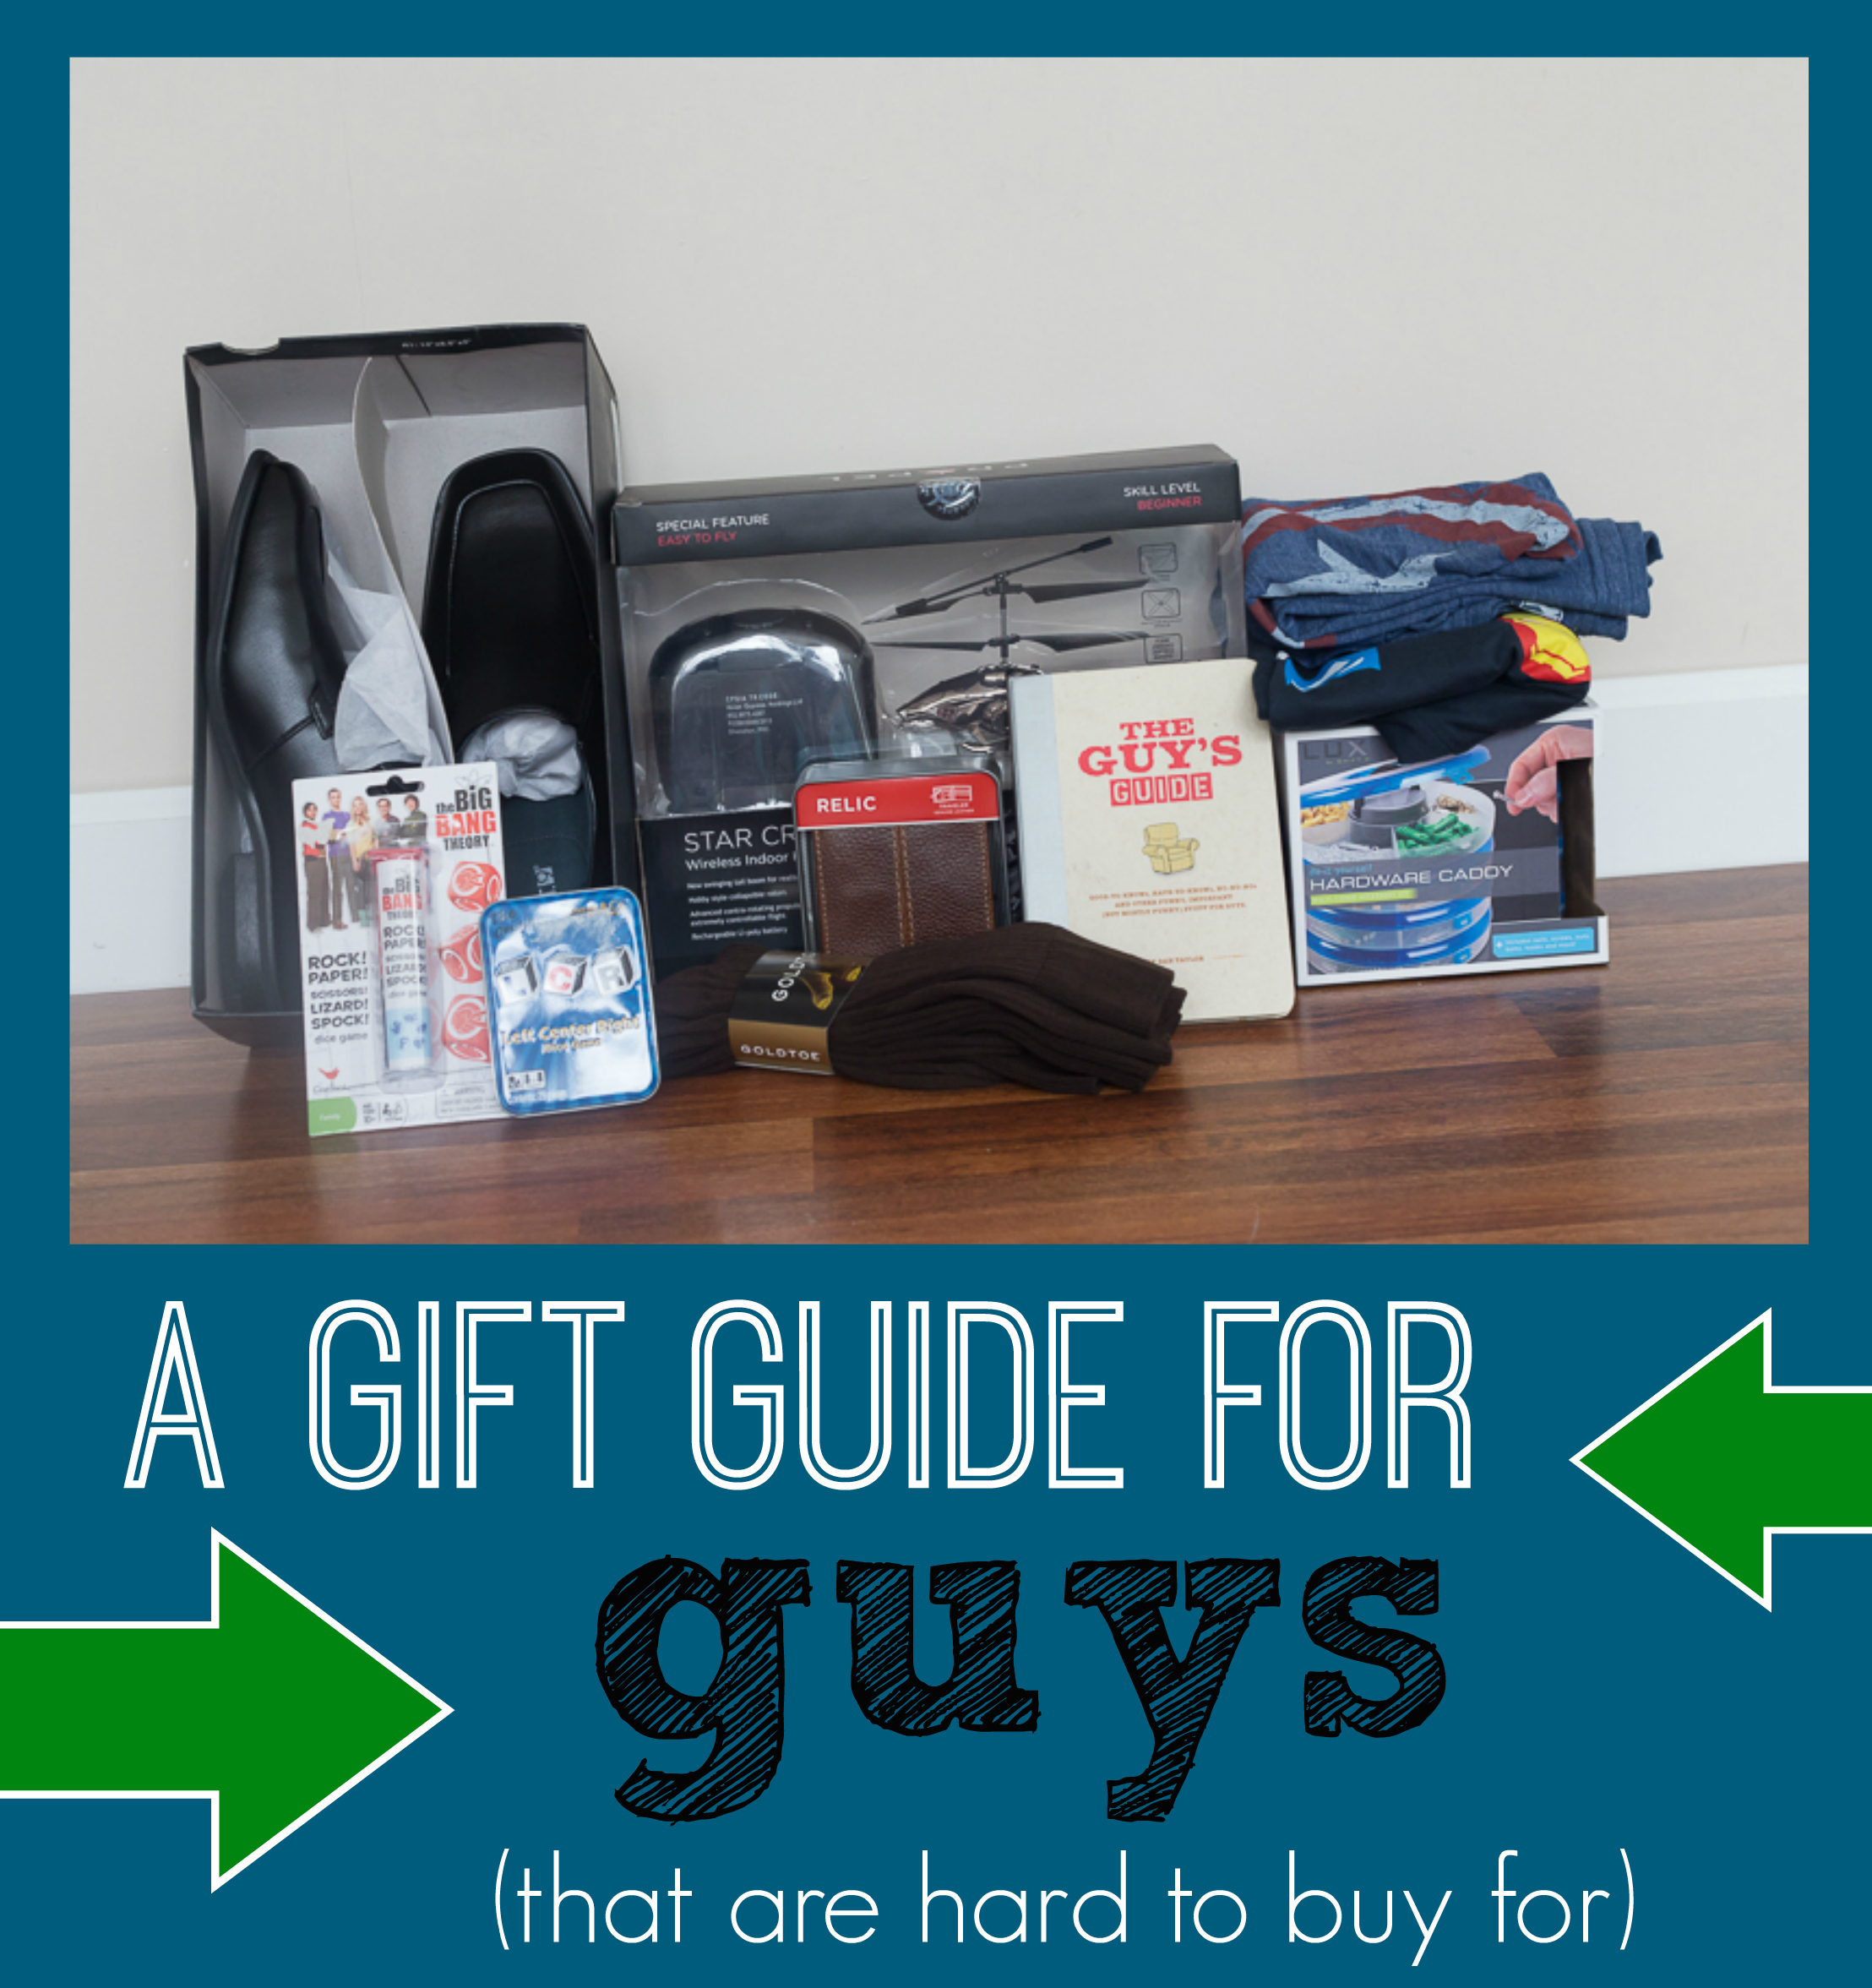 gift guide for guys (that are hard to buy for)ard to buy for)